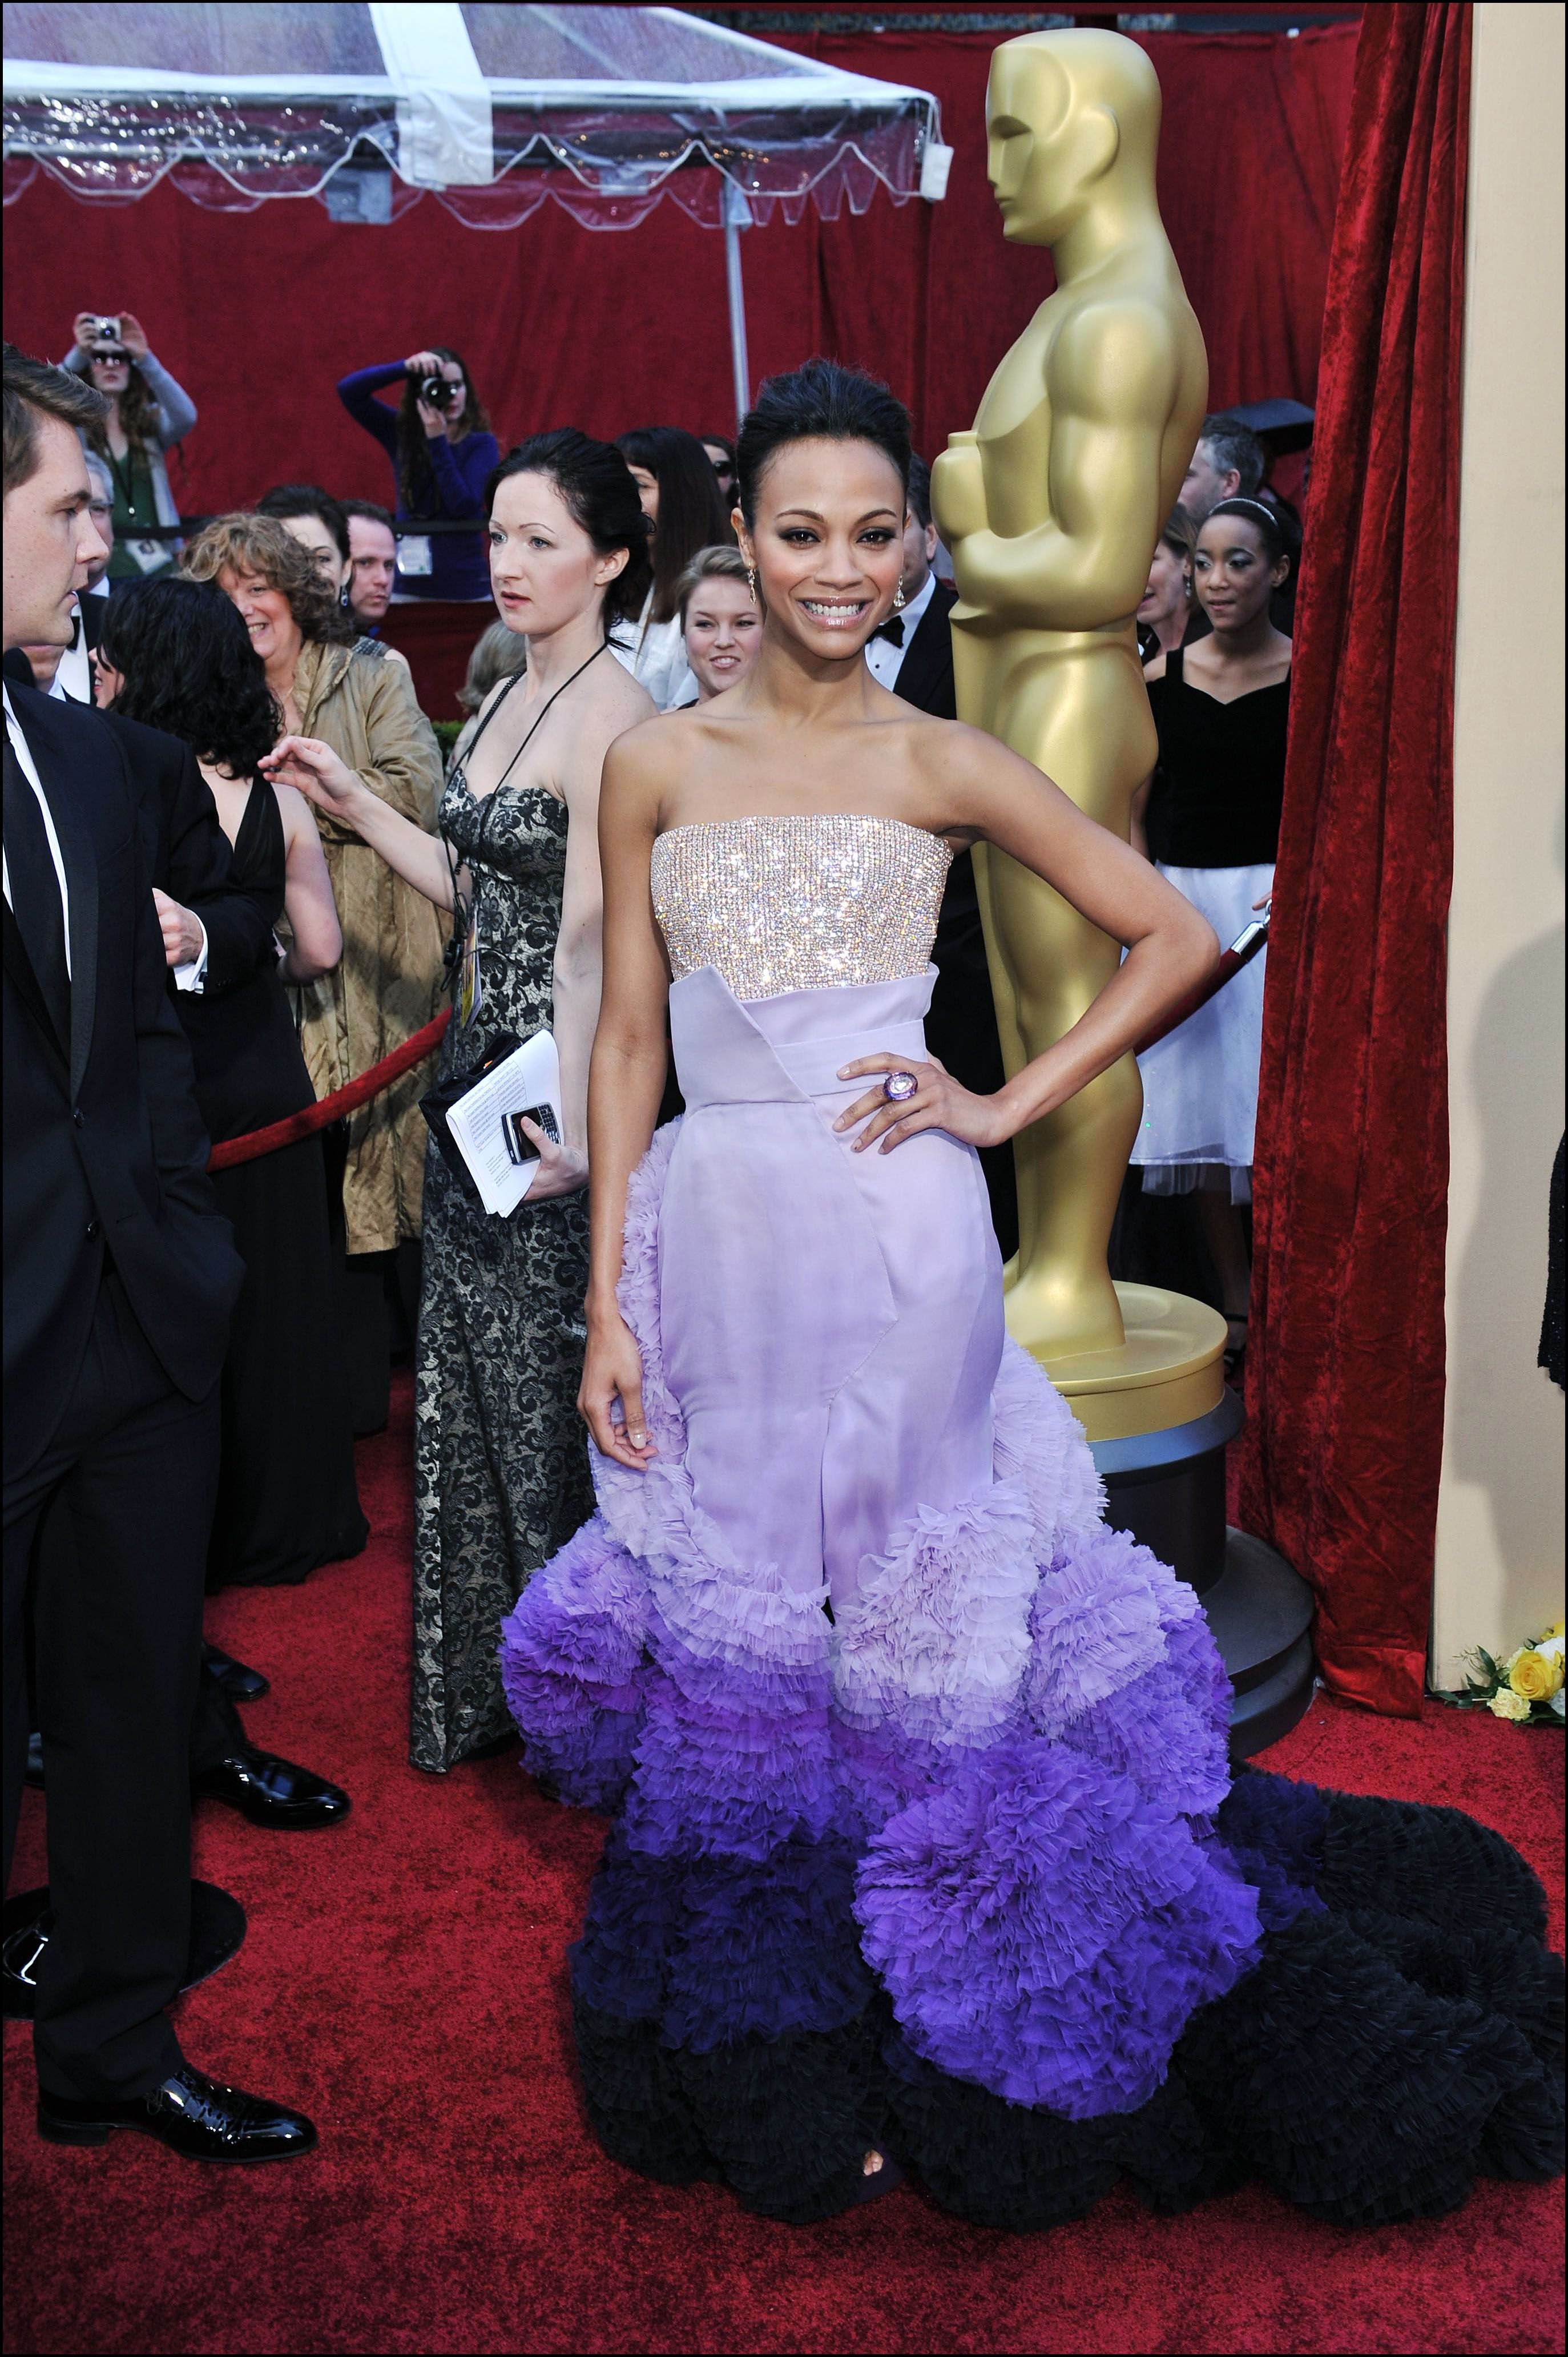  Zoe Saldana arrives at the 82nd Annual Academy Awards at the Kodak Theatre on March 7, 2010 in Hollywood, California. | Source: Getty Images